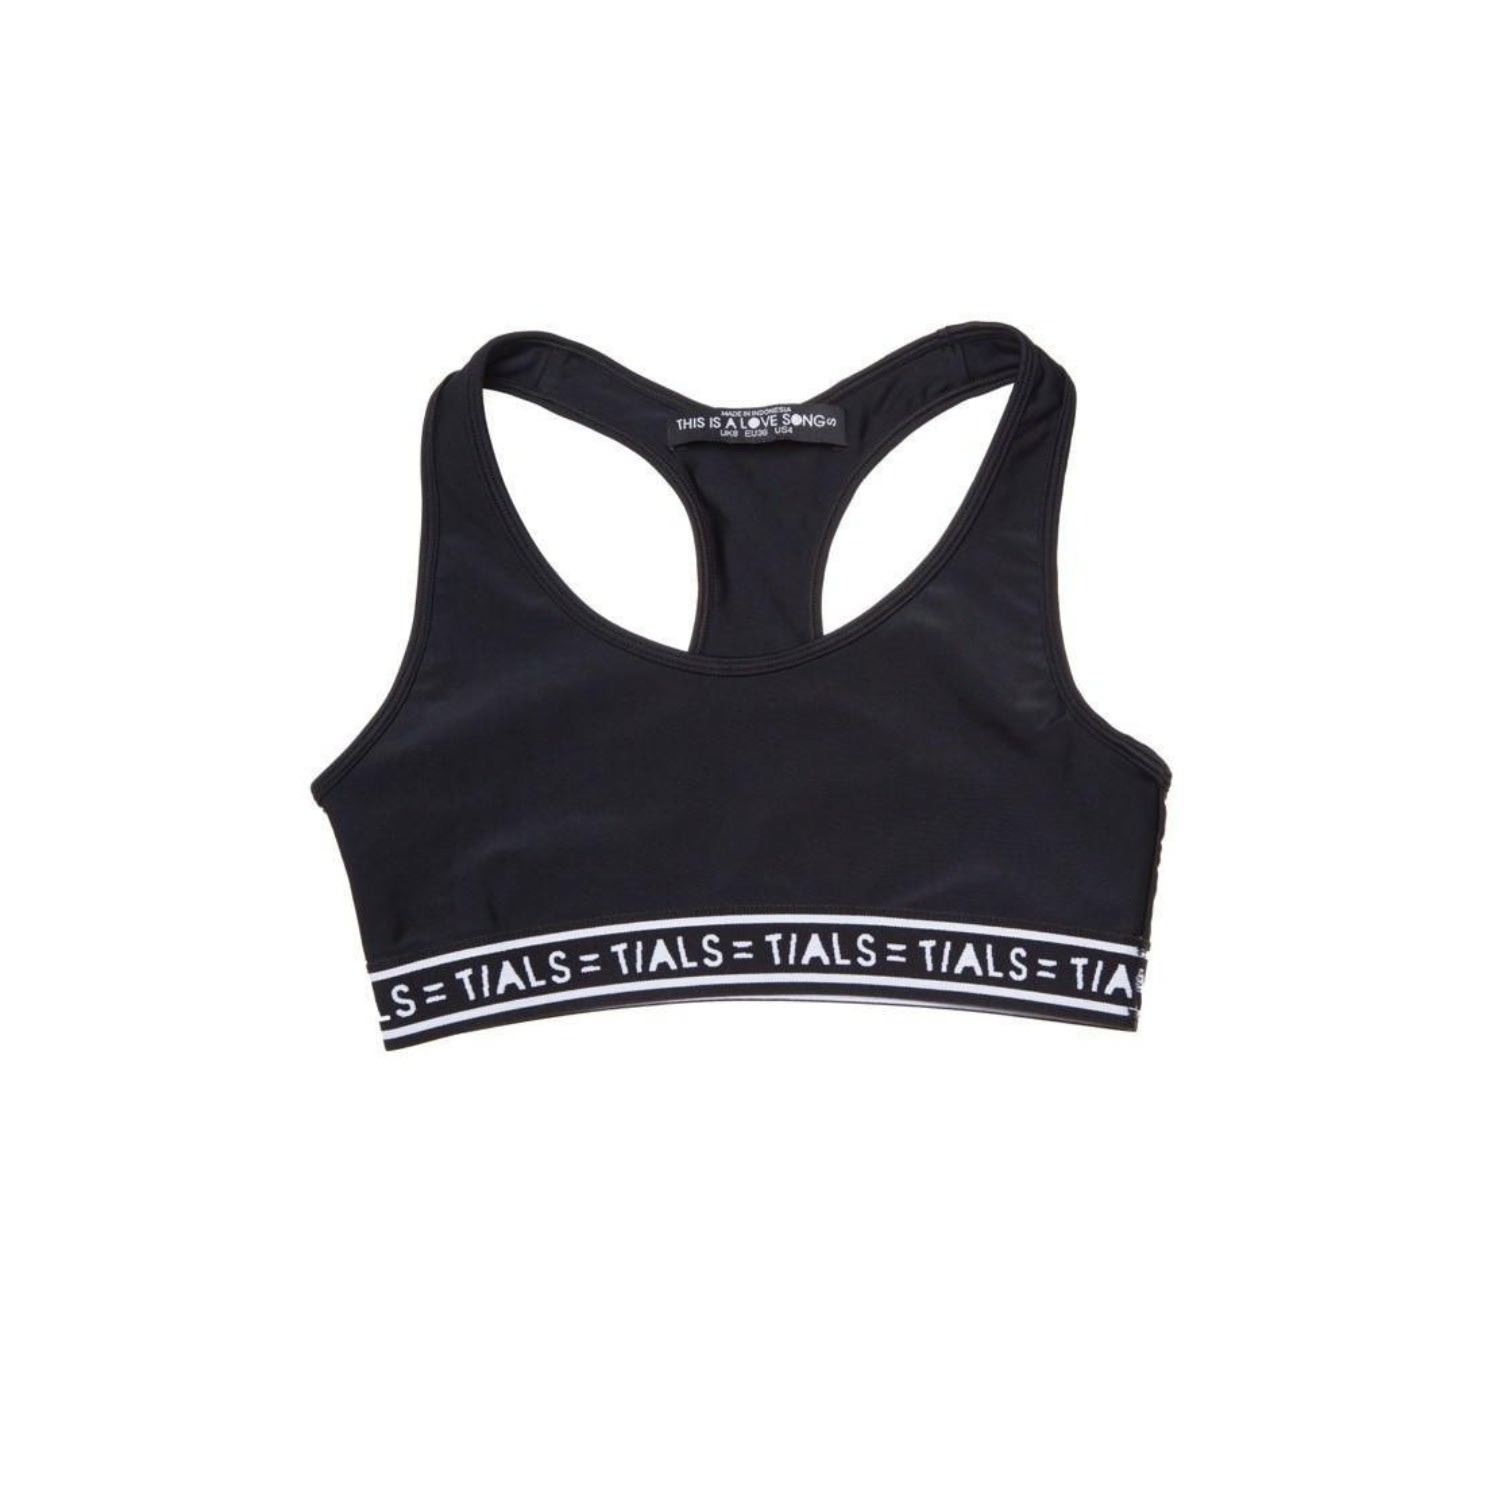 THIS IS A LOVE SONG - Logo Racerback Bra Black